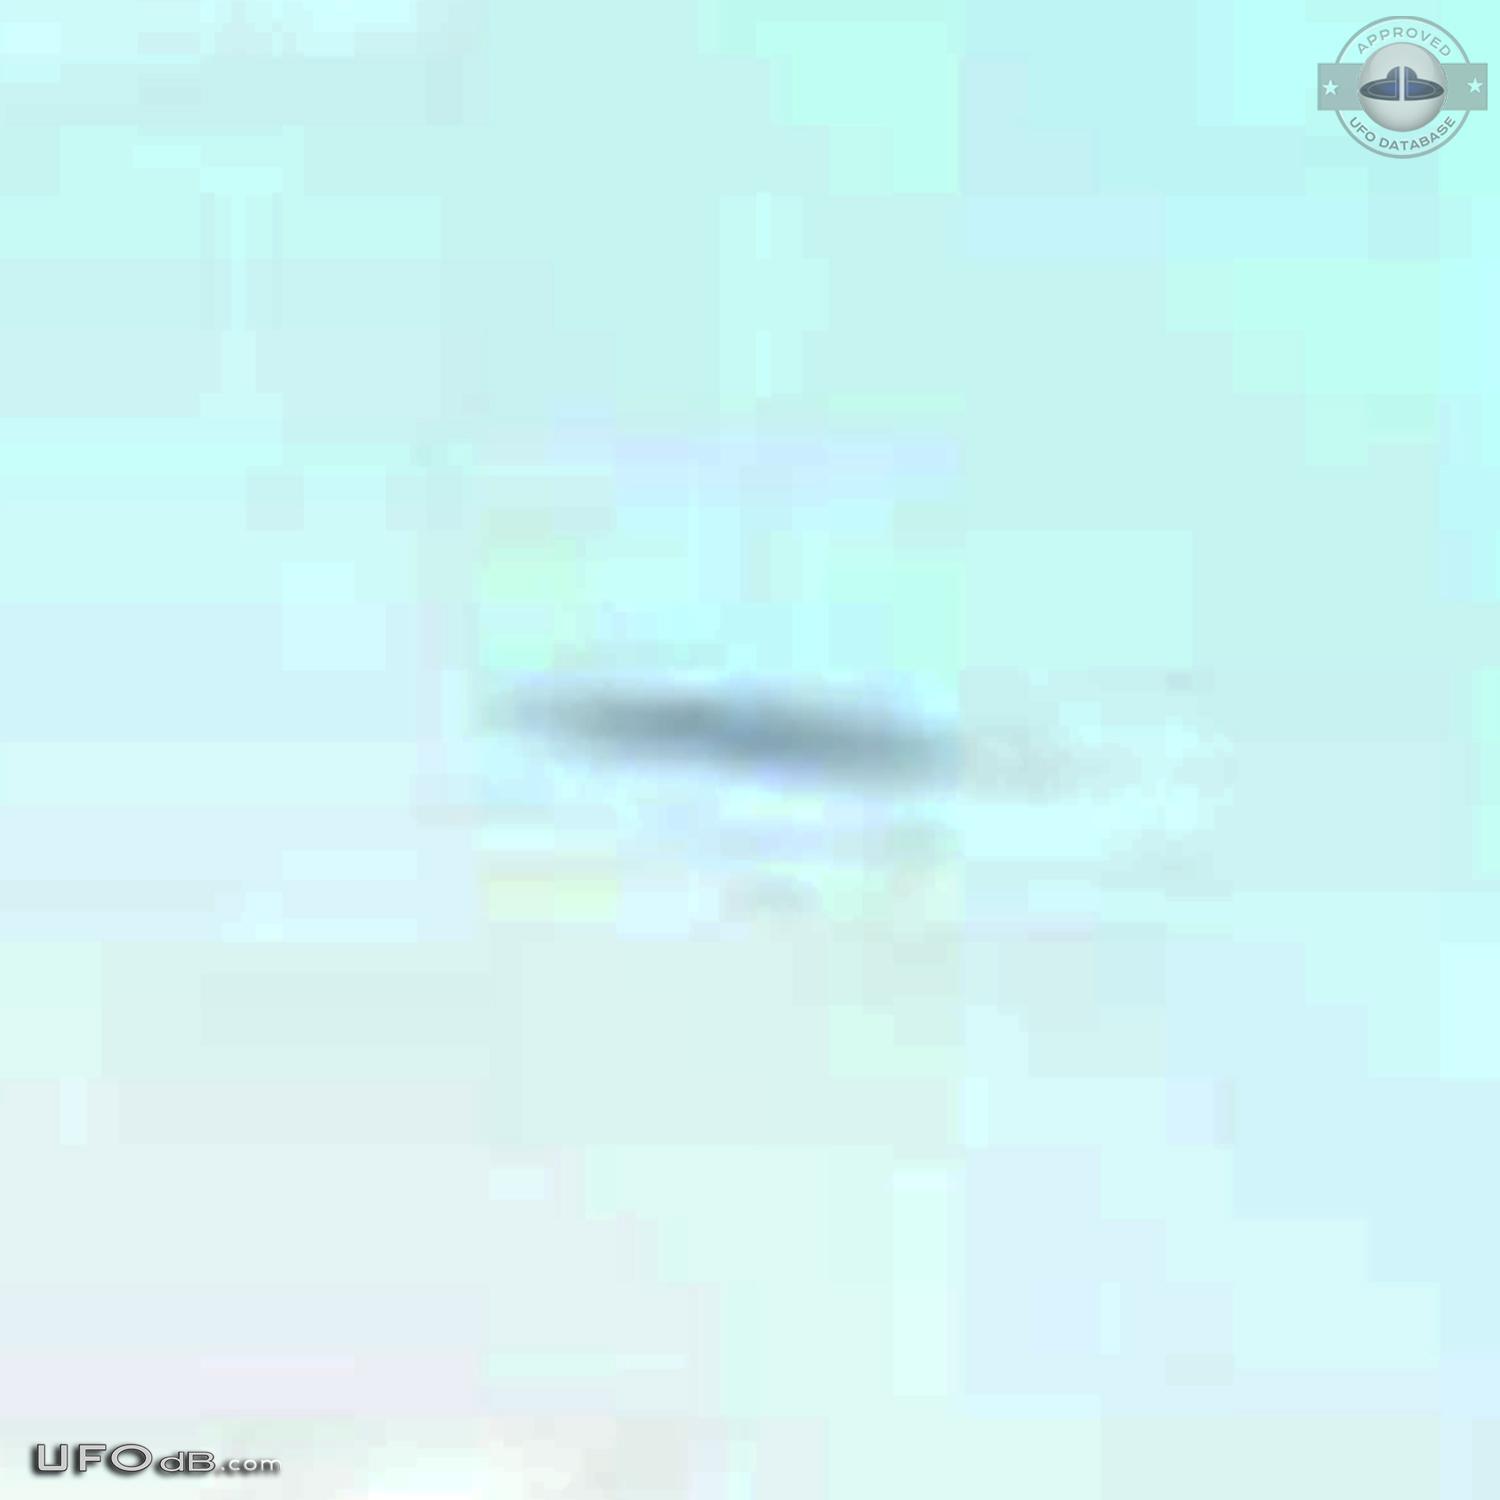 UFO picture showing saucer near Delphi Greece caught in June 3 2012 UFO Picture #449-5